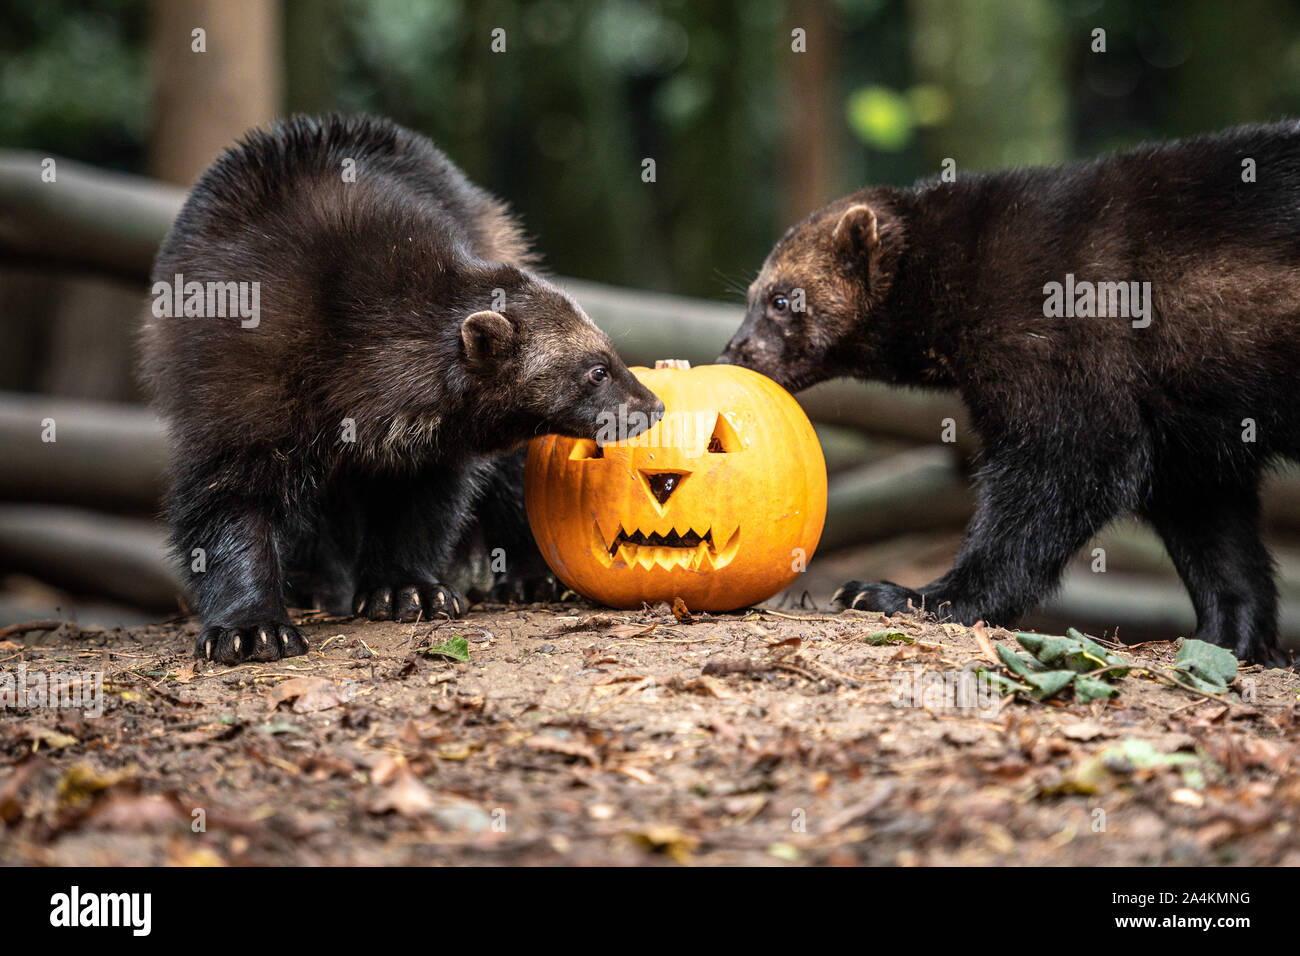 Cotswold Wildlife Park, Oxfordshire, UK. 15th Oct, 2019. Animals eat pumpkins carved with various designs, from spooky faces to impressions of the animals themselves. Sarka and Sharapova the wolverines. Credit: Andrew Walmsley/Alamy Live News Stock Photo